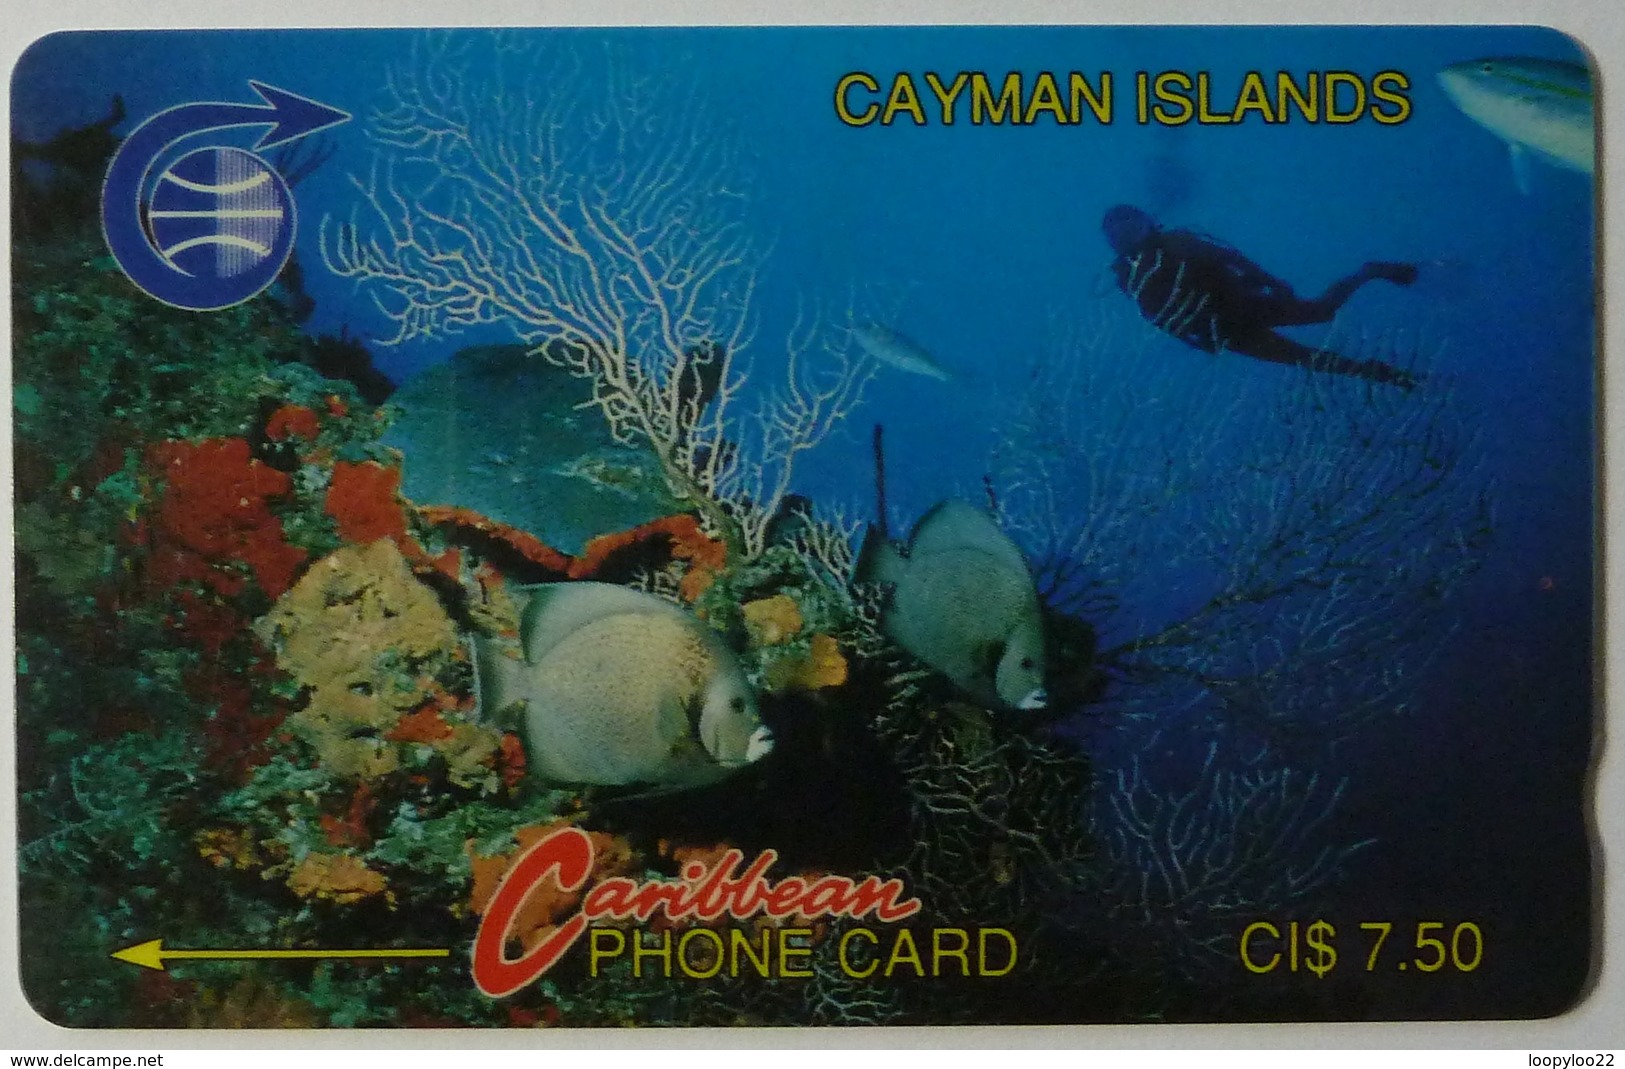 CAYMAN ISLANDS - GPT - CAY-2A - Underwater - Diver - 2CCIA - $7.50 - Used - Cayman Islands